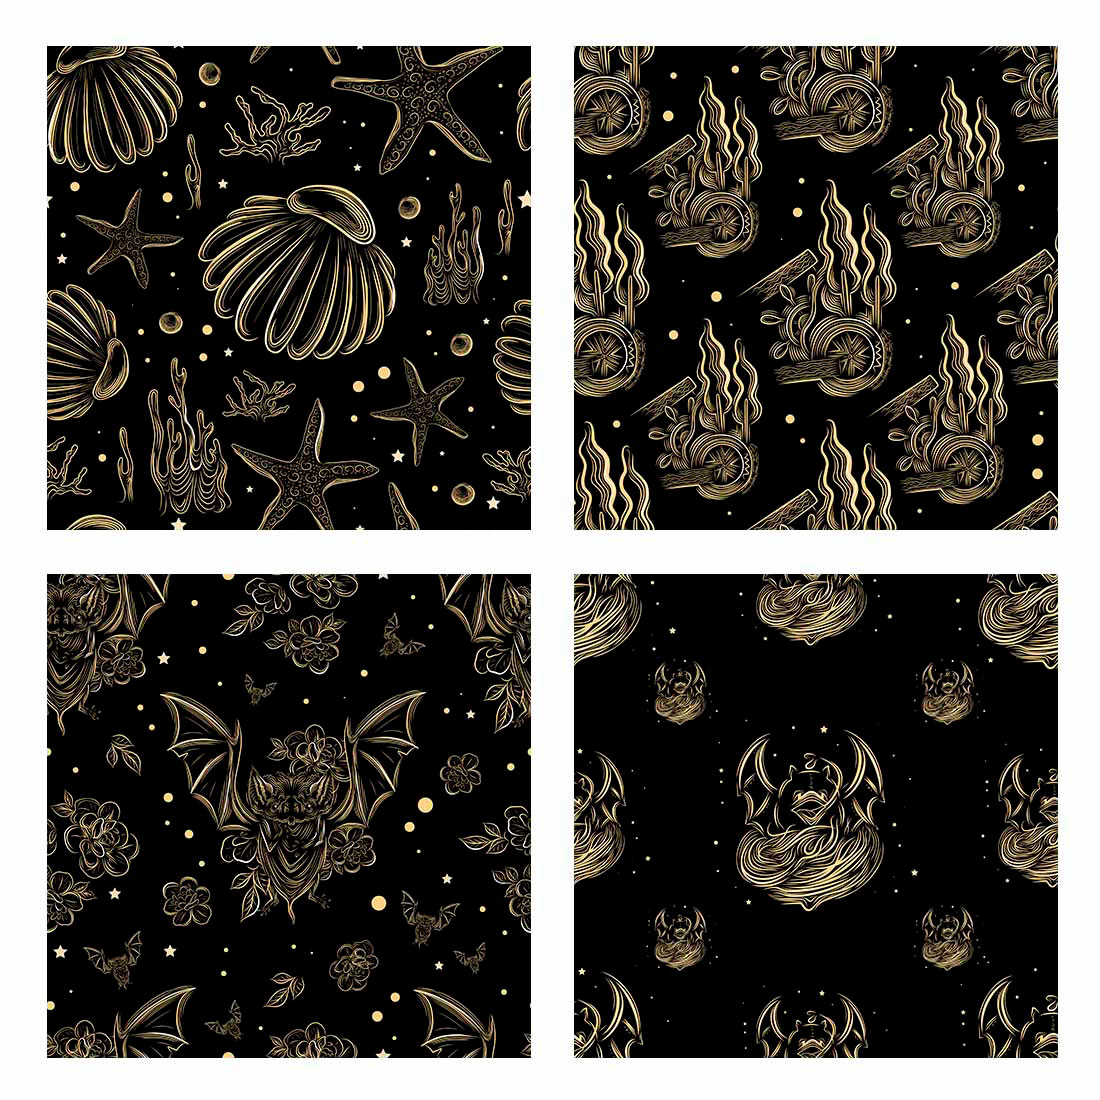 A selection of images of colorful black and gold patterns.